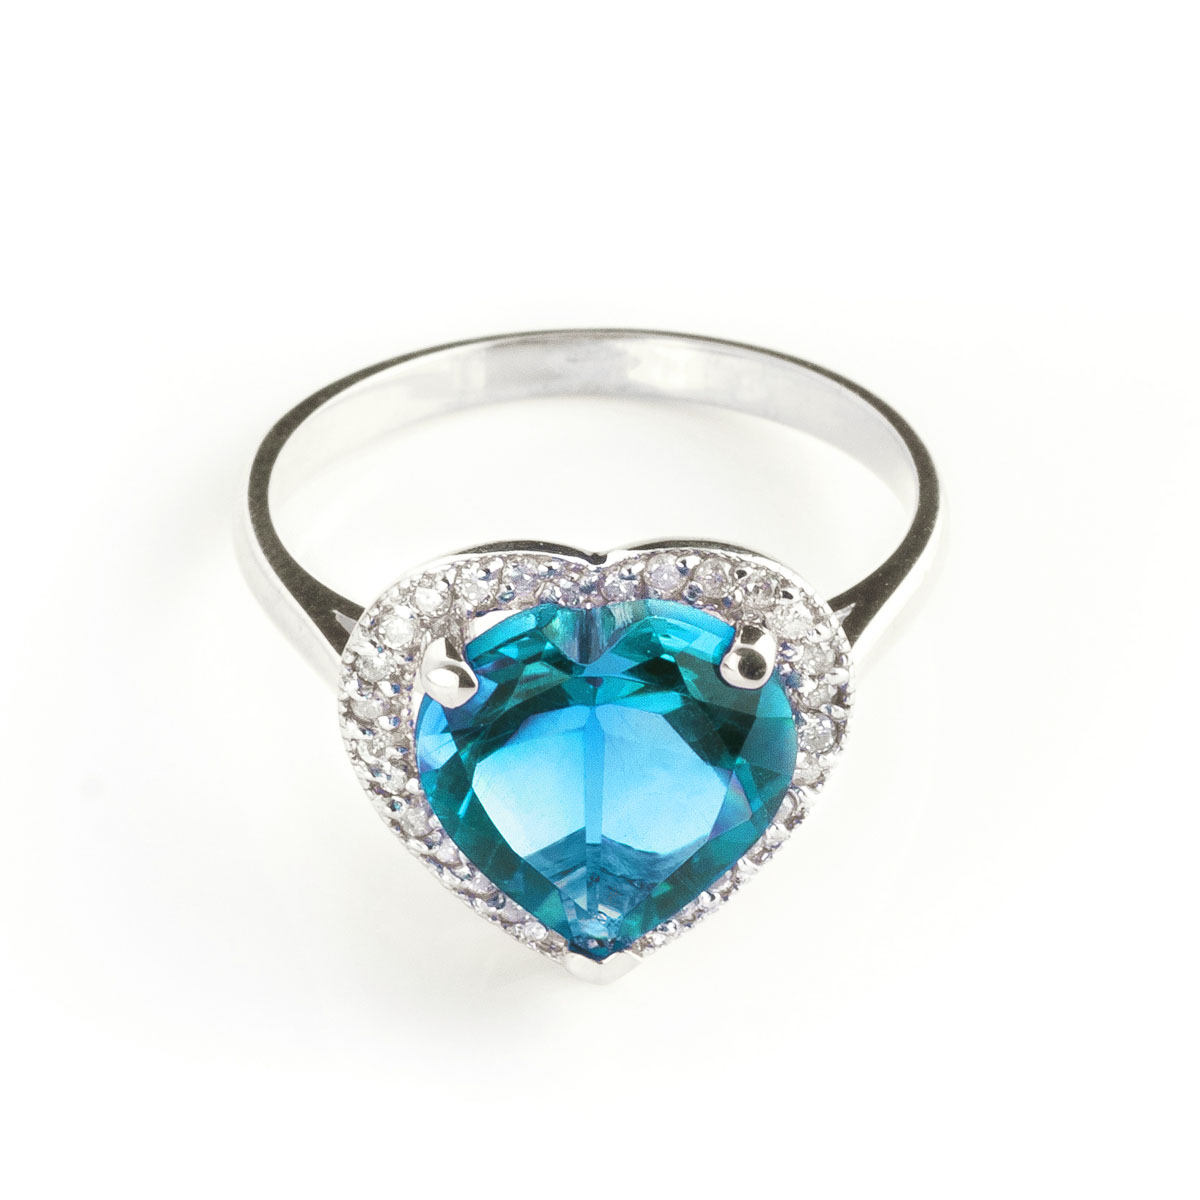 Blue Topaz Halo Ring 6.44 ctw in 9ct White Gold